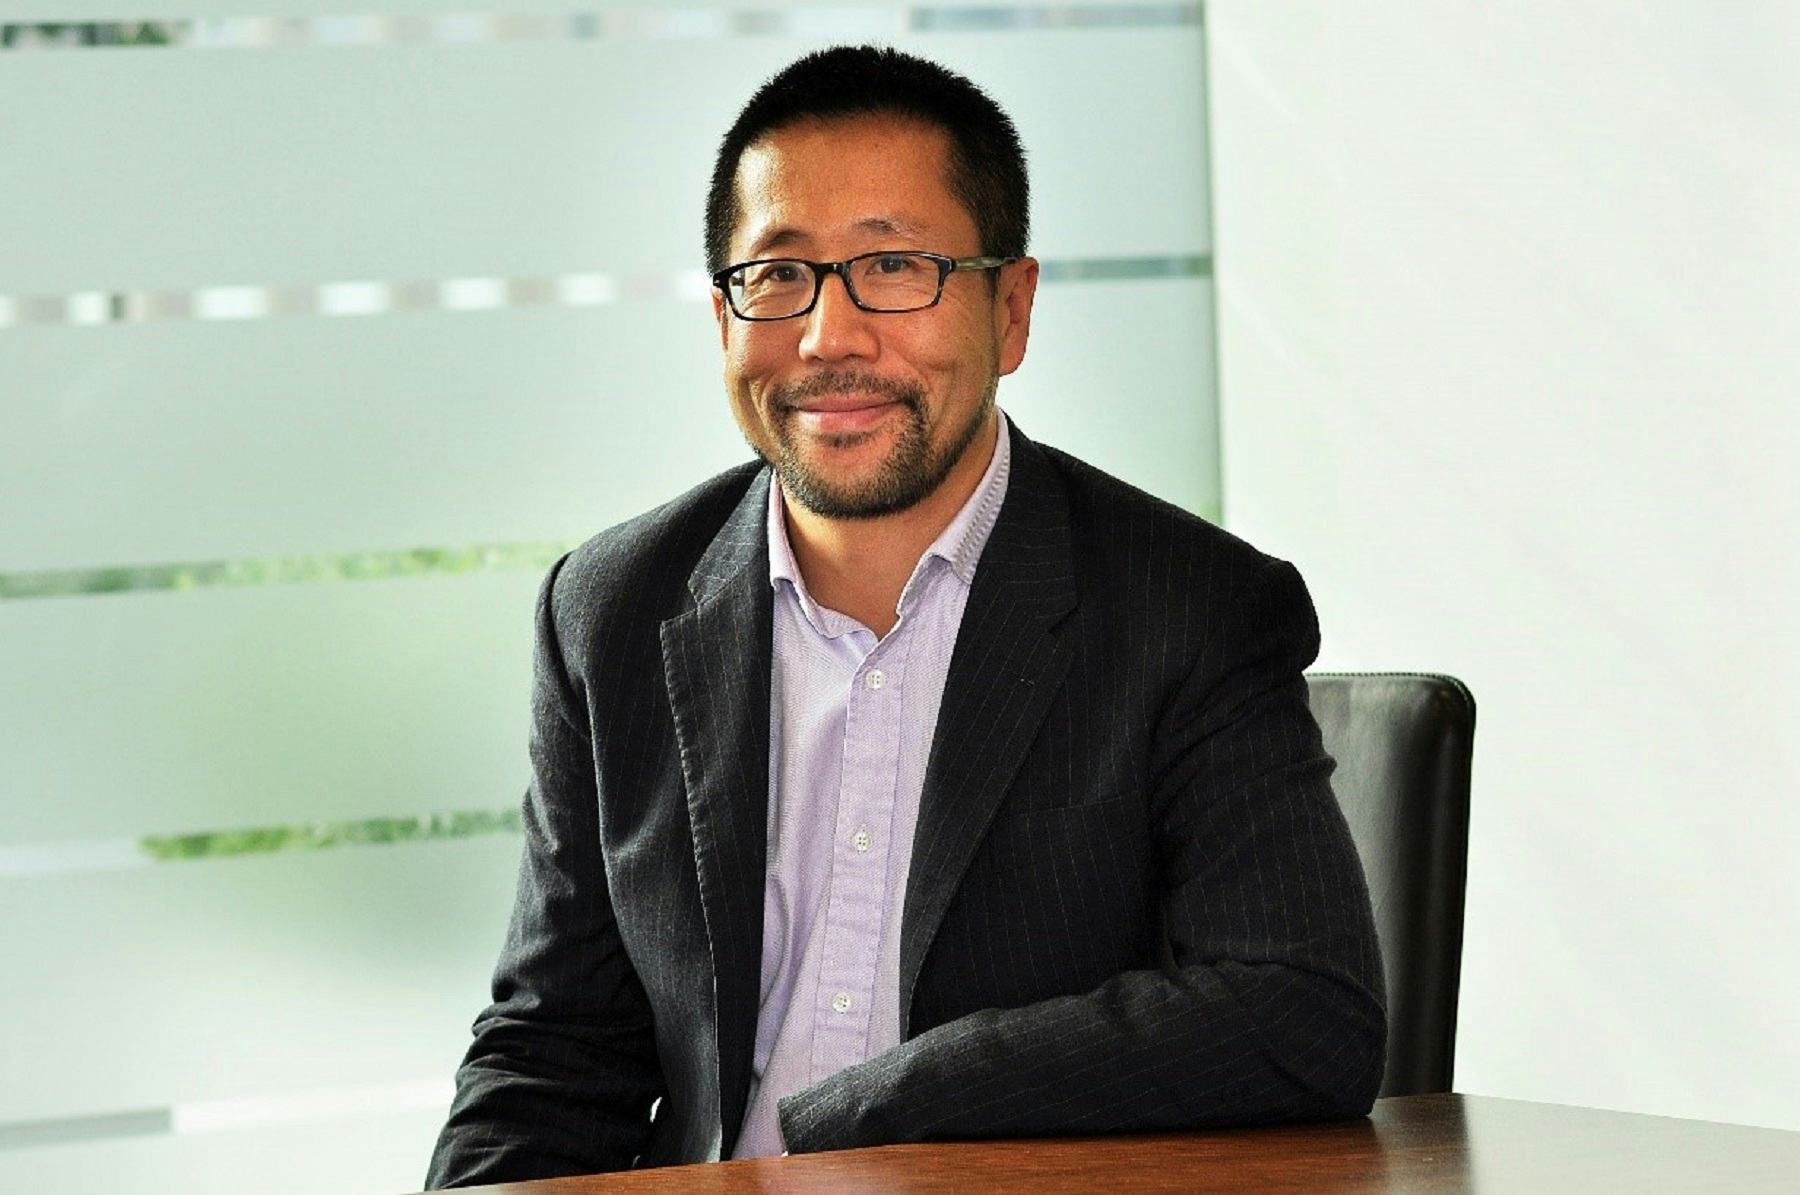 Paul Lee, Global Head of Research for the technology, media and telecommunications industry at Deloitte. – Photo Deloitte 